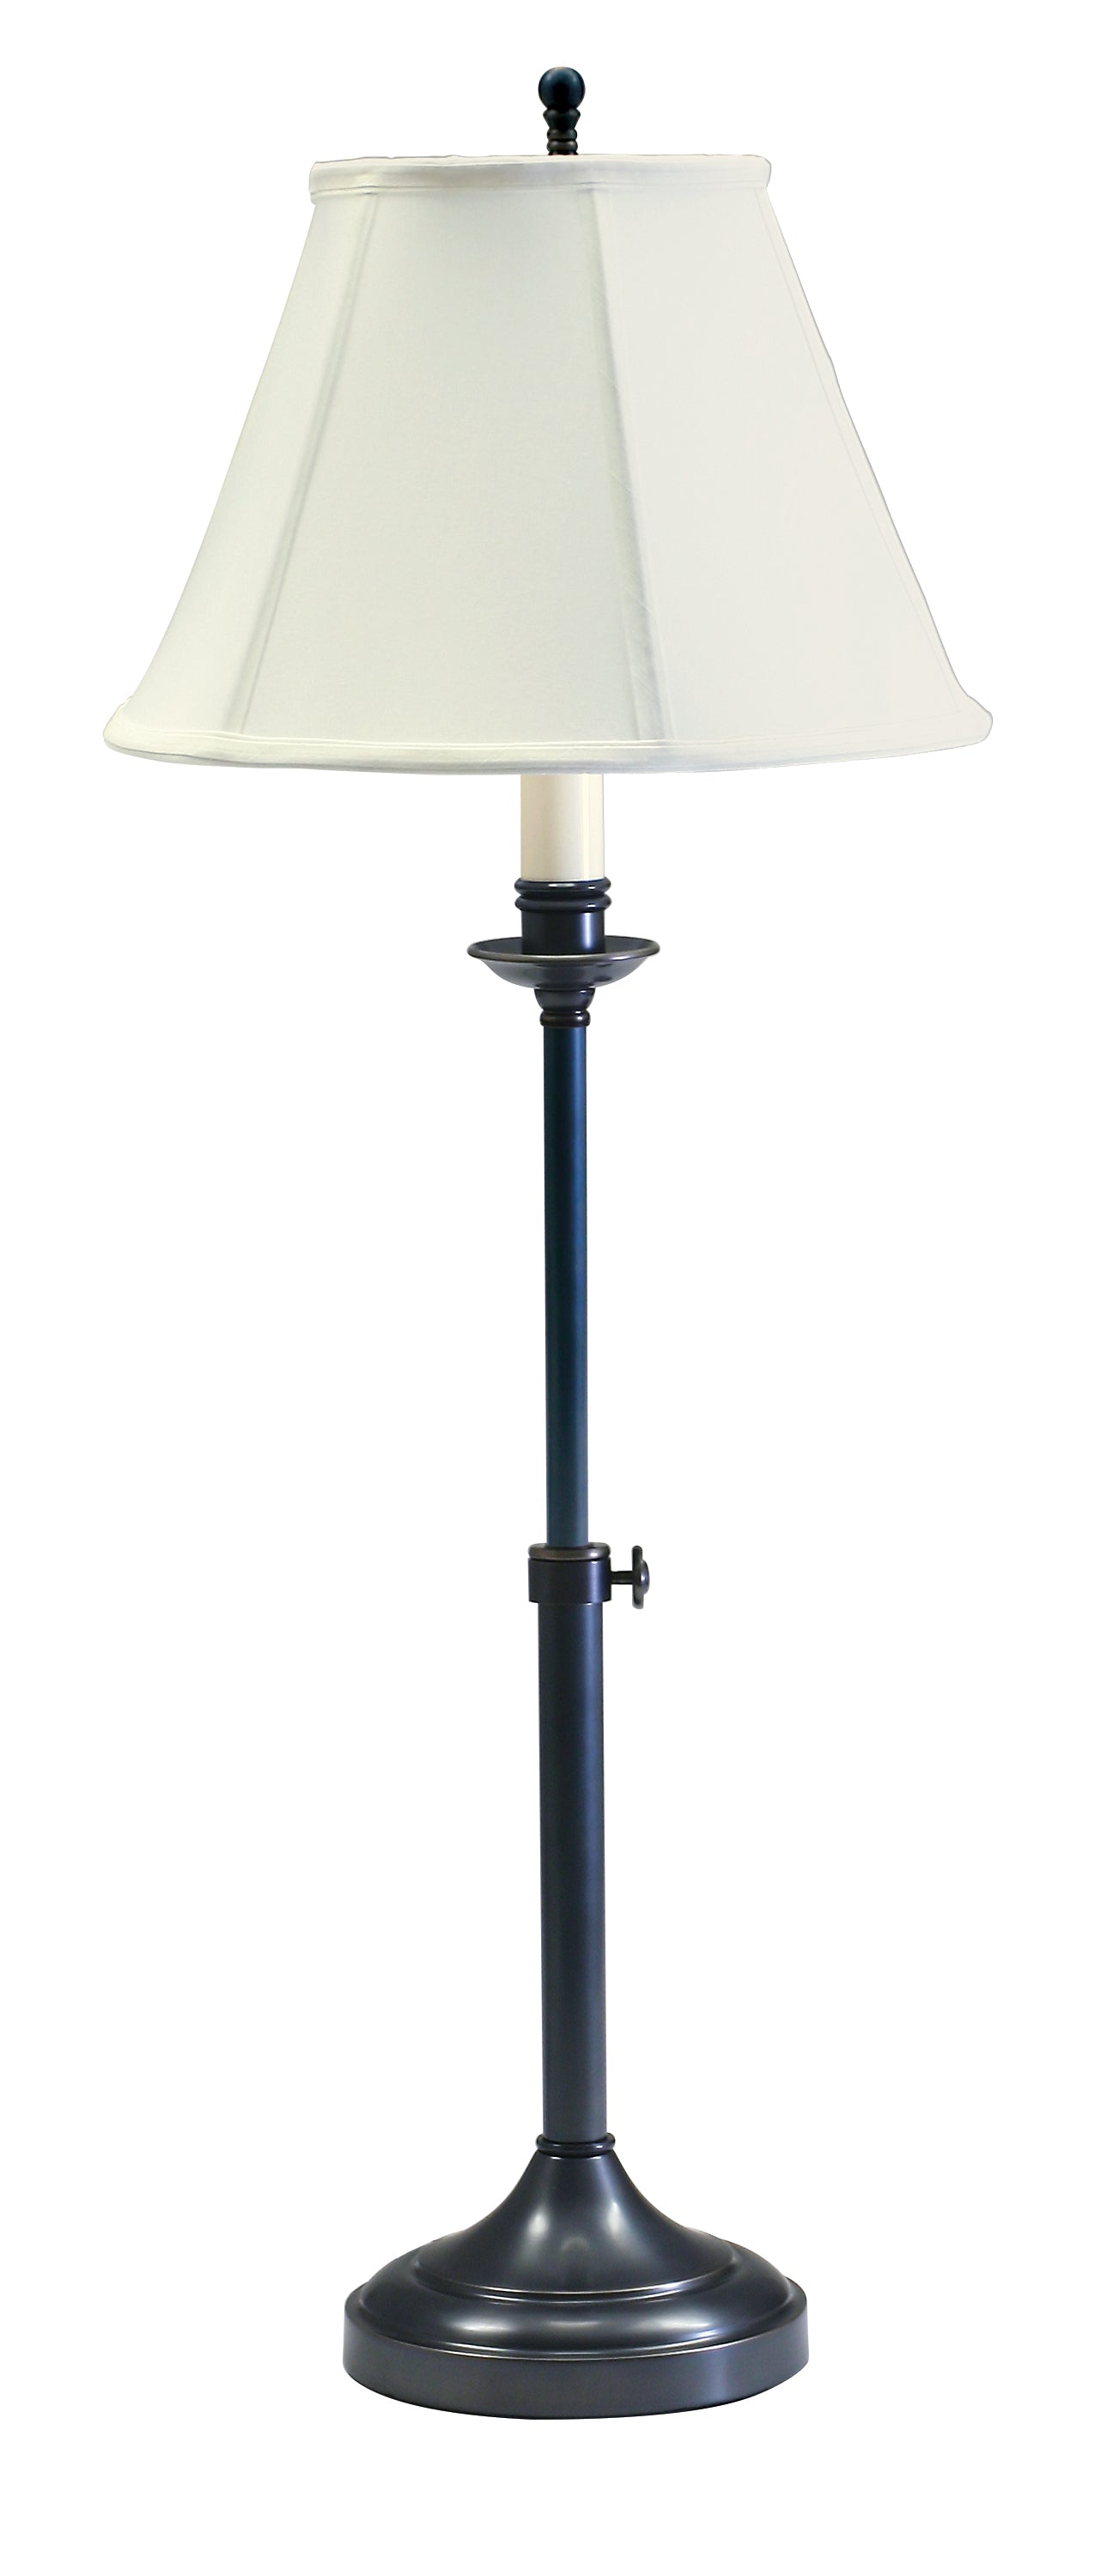 House of Troy Club Adjustable Oil Rubbed Bronze Table Lamp CL250-OB